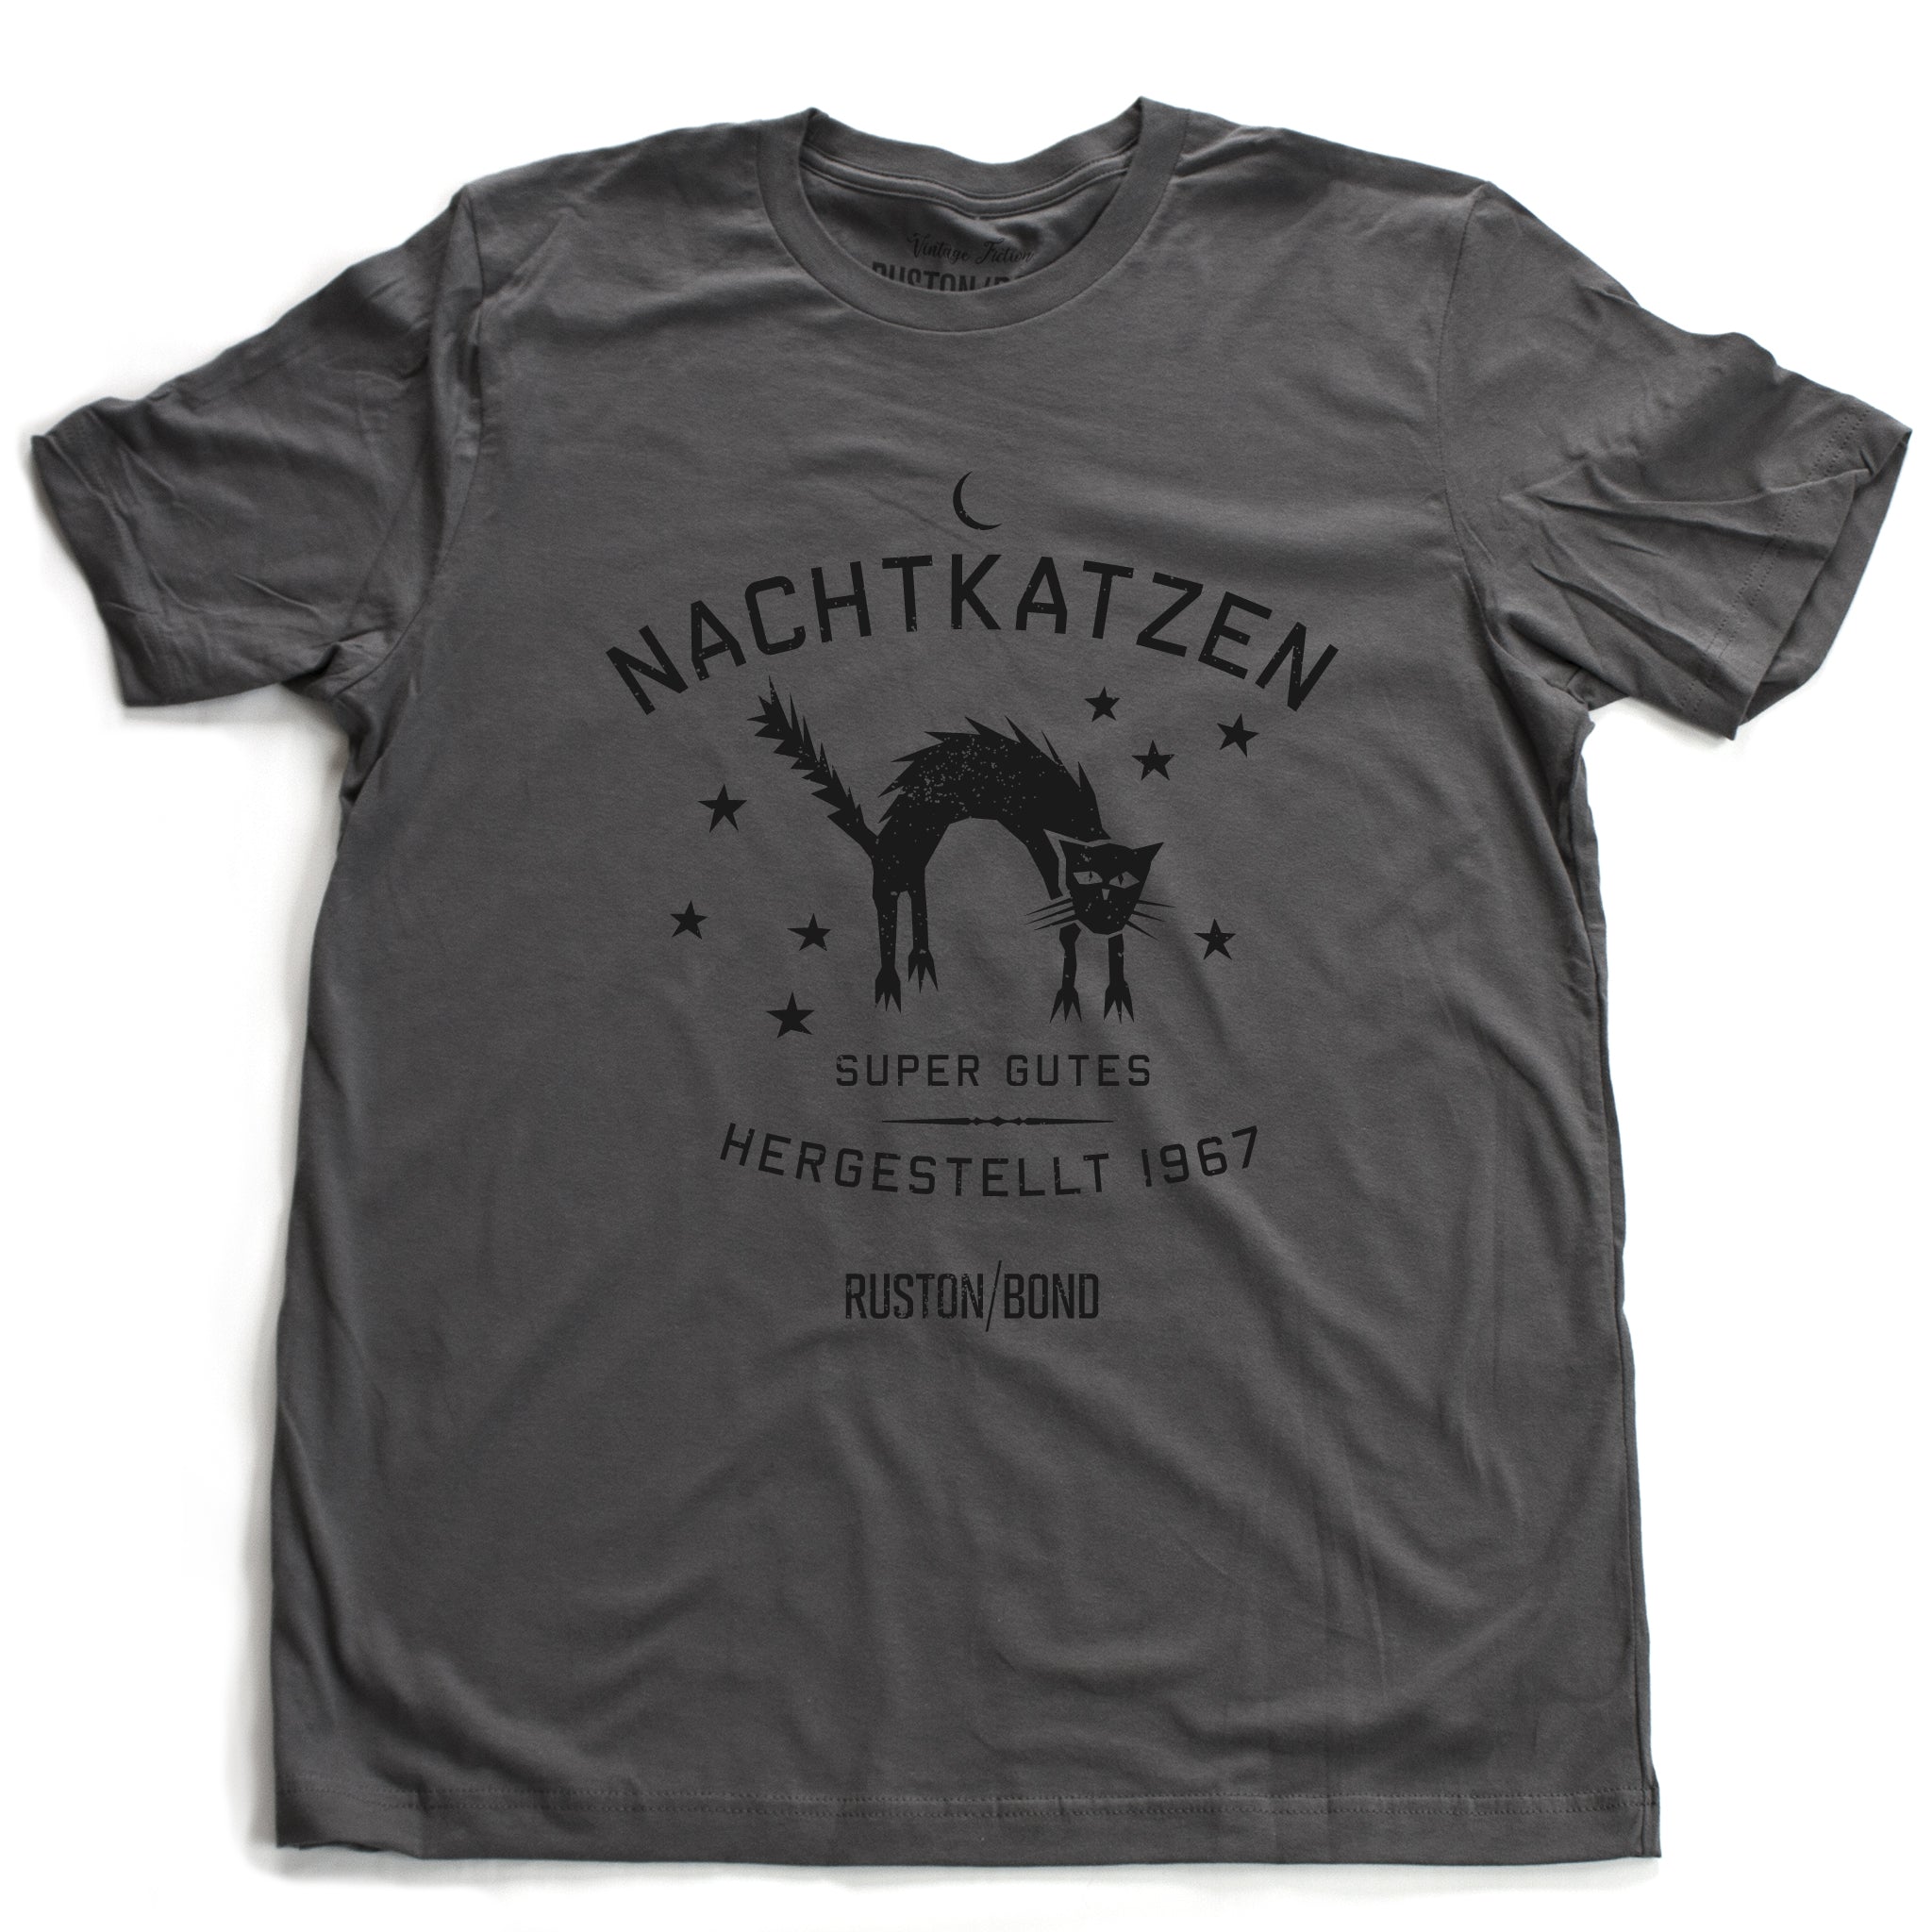 A vintage-inspired retro design graphic t-shirt in Asphalt Gray, featuring the image of an arched cat among stars, and the German text “NACHTKATZEN, Super Gutes” — translating to “Night Cats, super good” and the year 1967, with the Ruston/Bond logo beneath. From wolfsaint.net